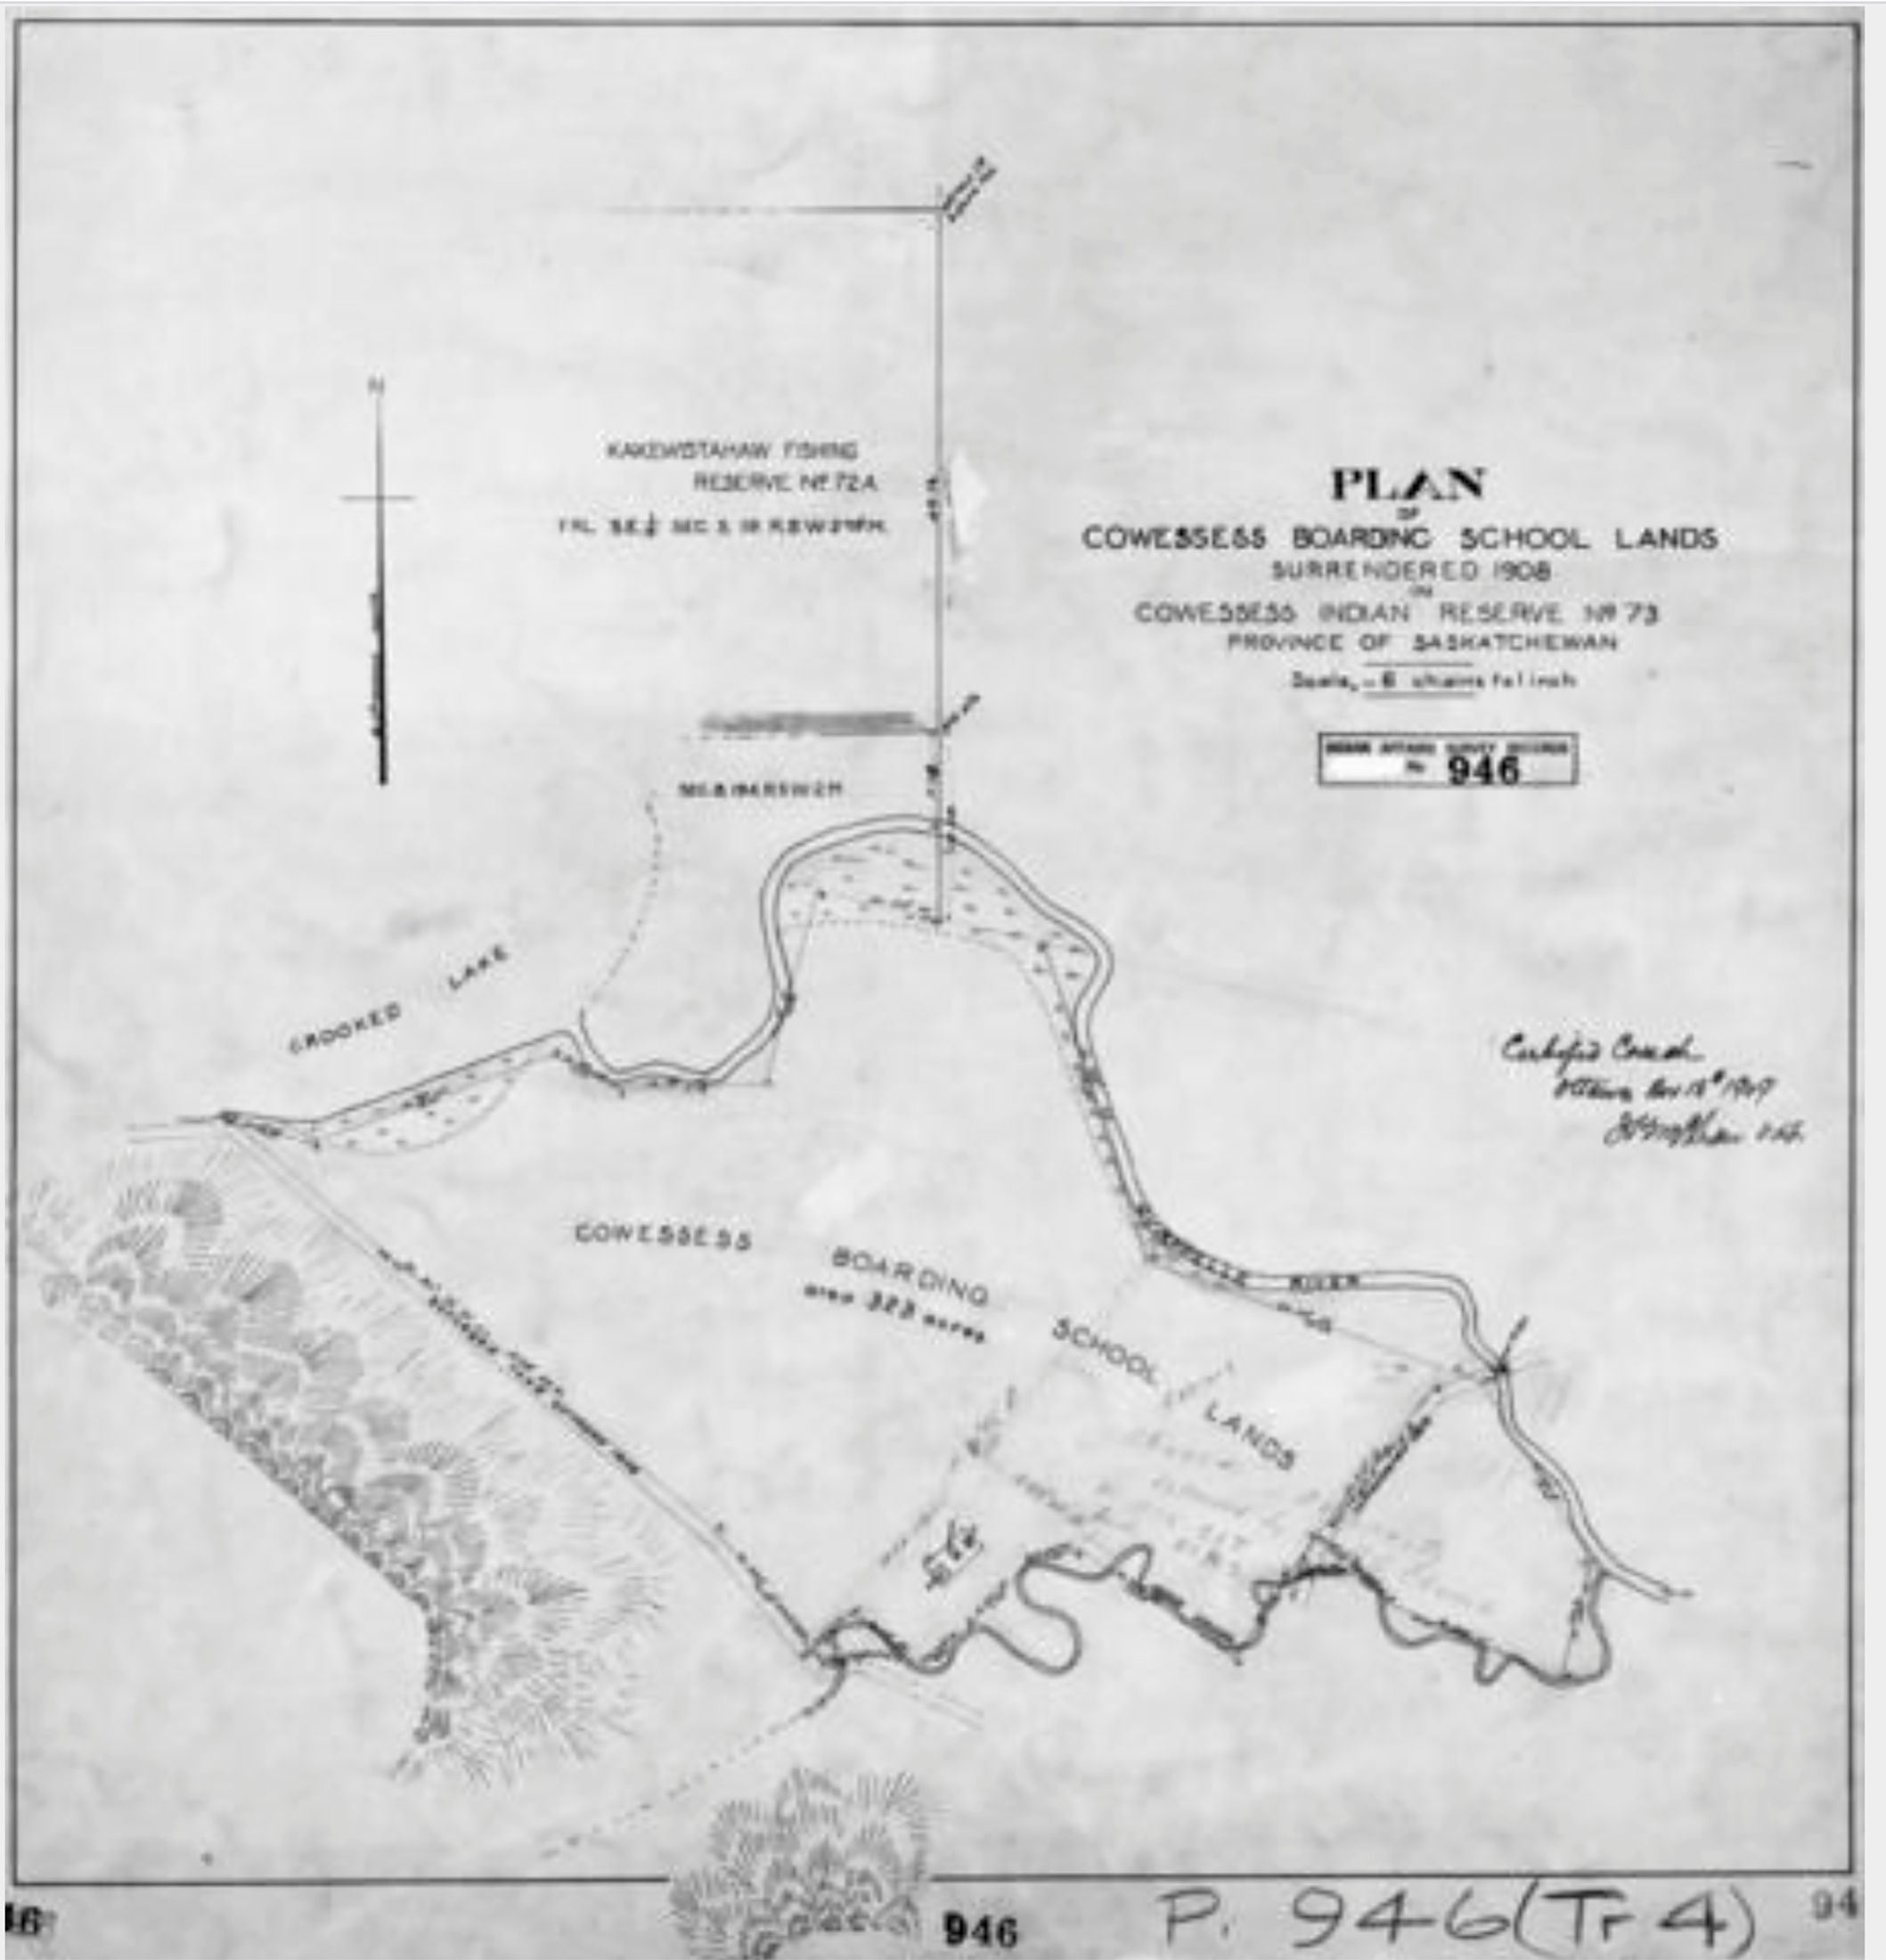 The area of the Marieval Indian Residential School is seen in an undated map on the Cowessess Reserve near Grayson